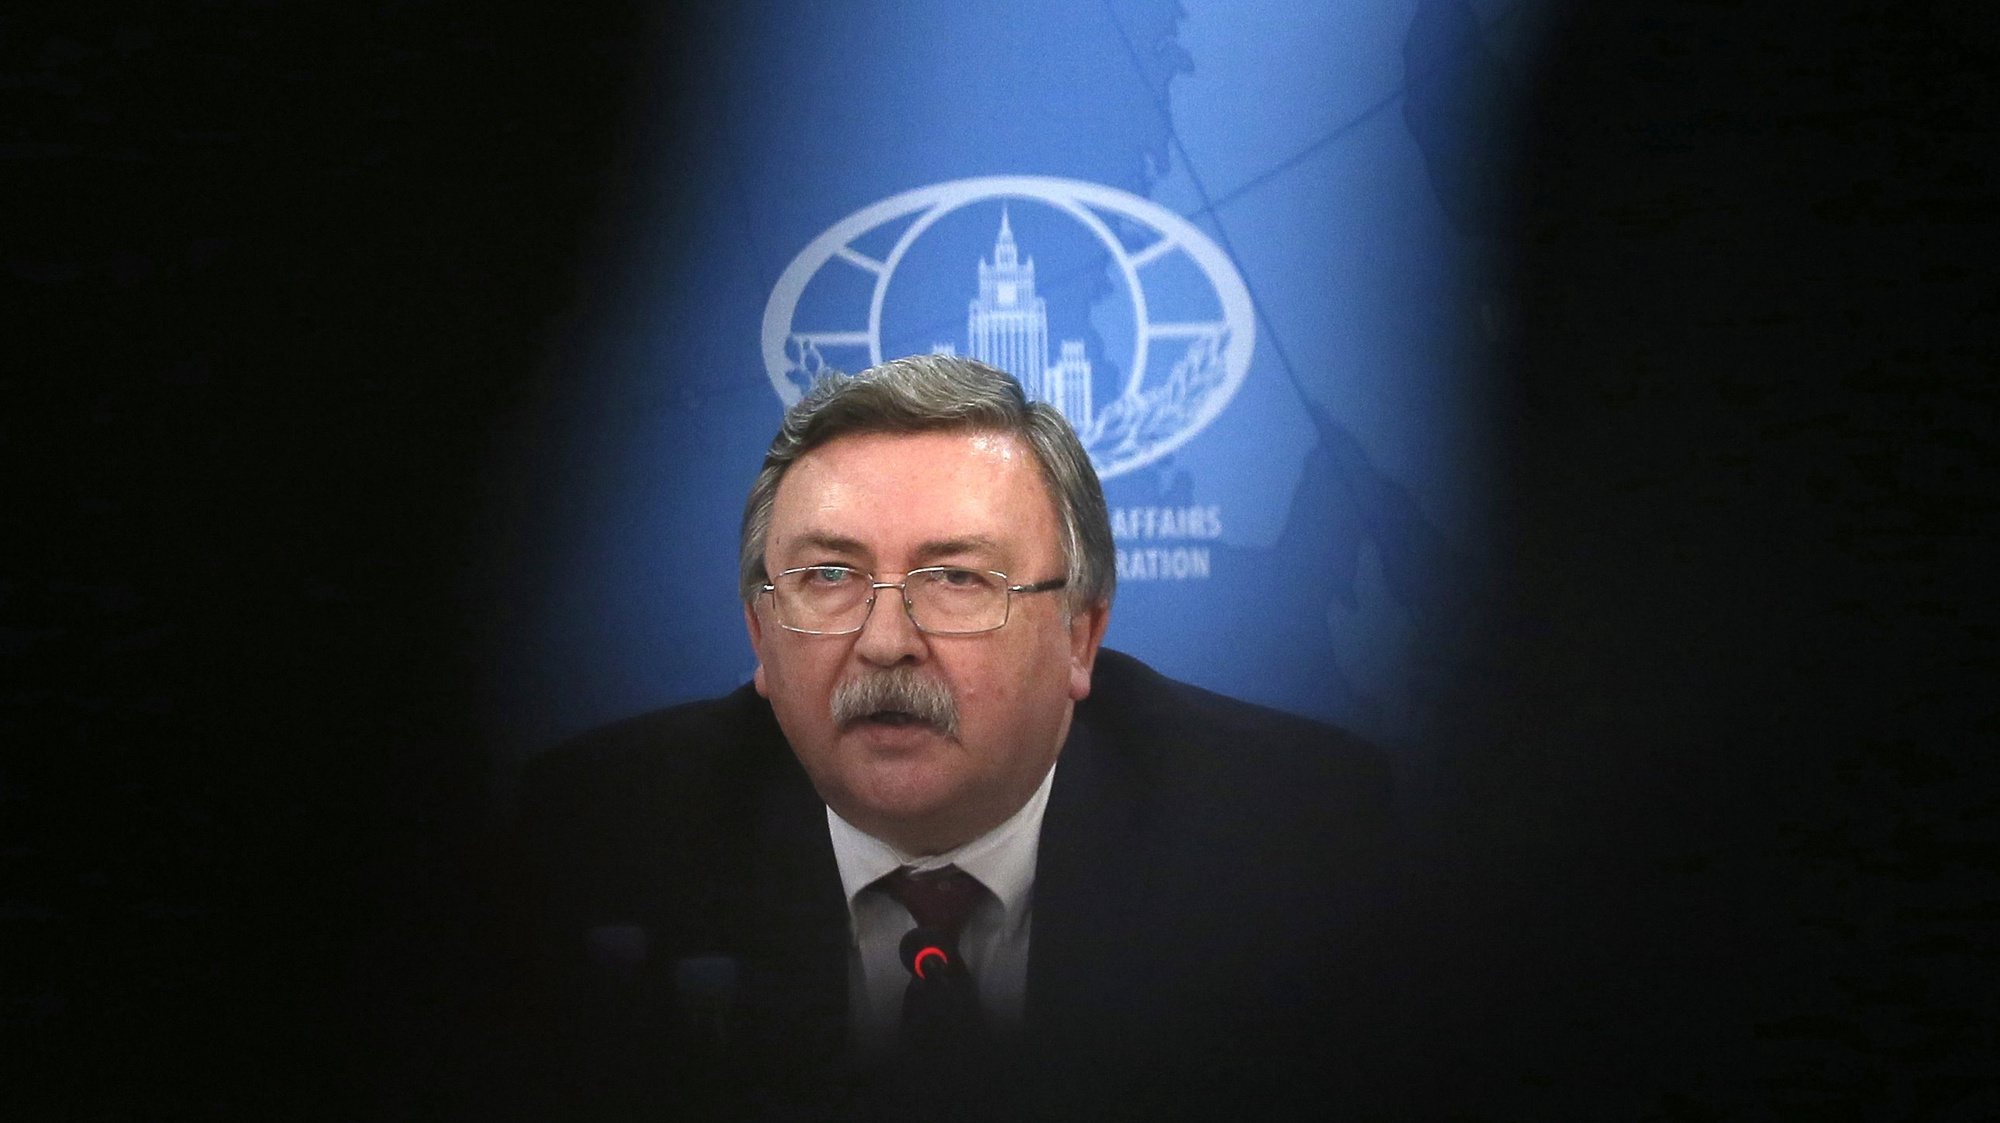 epa06303725 Director of the Russian Foreign Ministry Department for Non-Proliferation and Arms Control Mikhail Ulyanov speaks during a briefing presenting Russian assessment of the Seventh Report of the Organization for the Prohibition of Chemical Weapons (OPCW)-UN Joint Investigative Mechanism (JIM) in Moscow, Russia, 02 November 2017. The report blames Syrian President Bashar al-Assad&#039;s regime for use of sarin gas in Khan Sheikhoun.  EPA/MAXIM SHIPENKOV